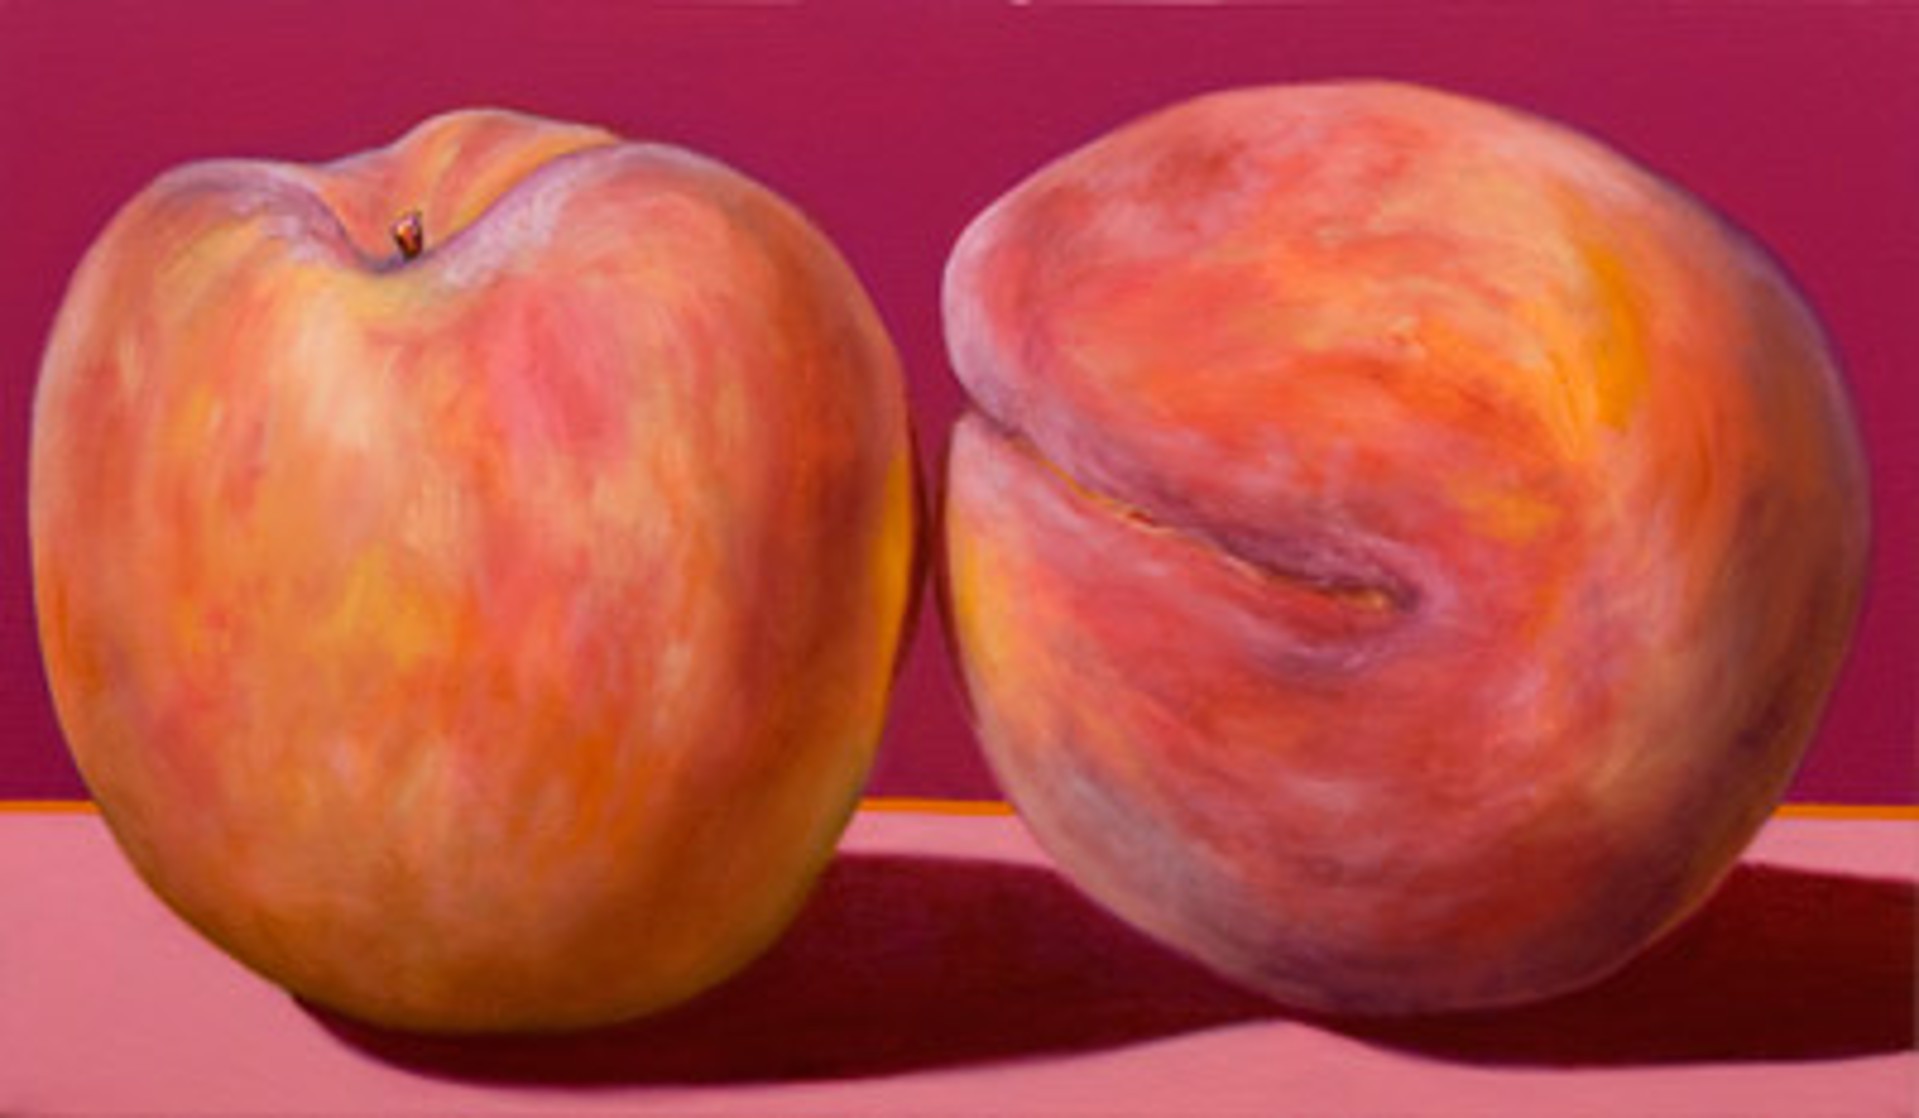 Peaches on Deep Rose by Bill Chisholm